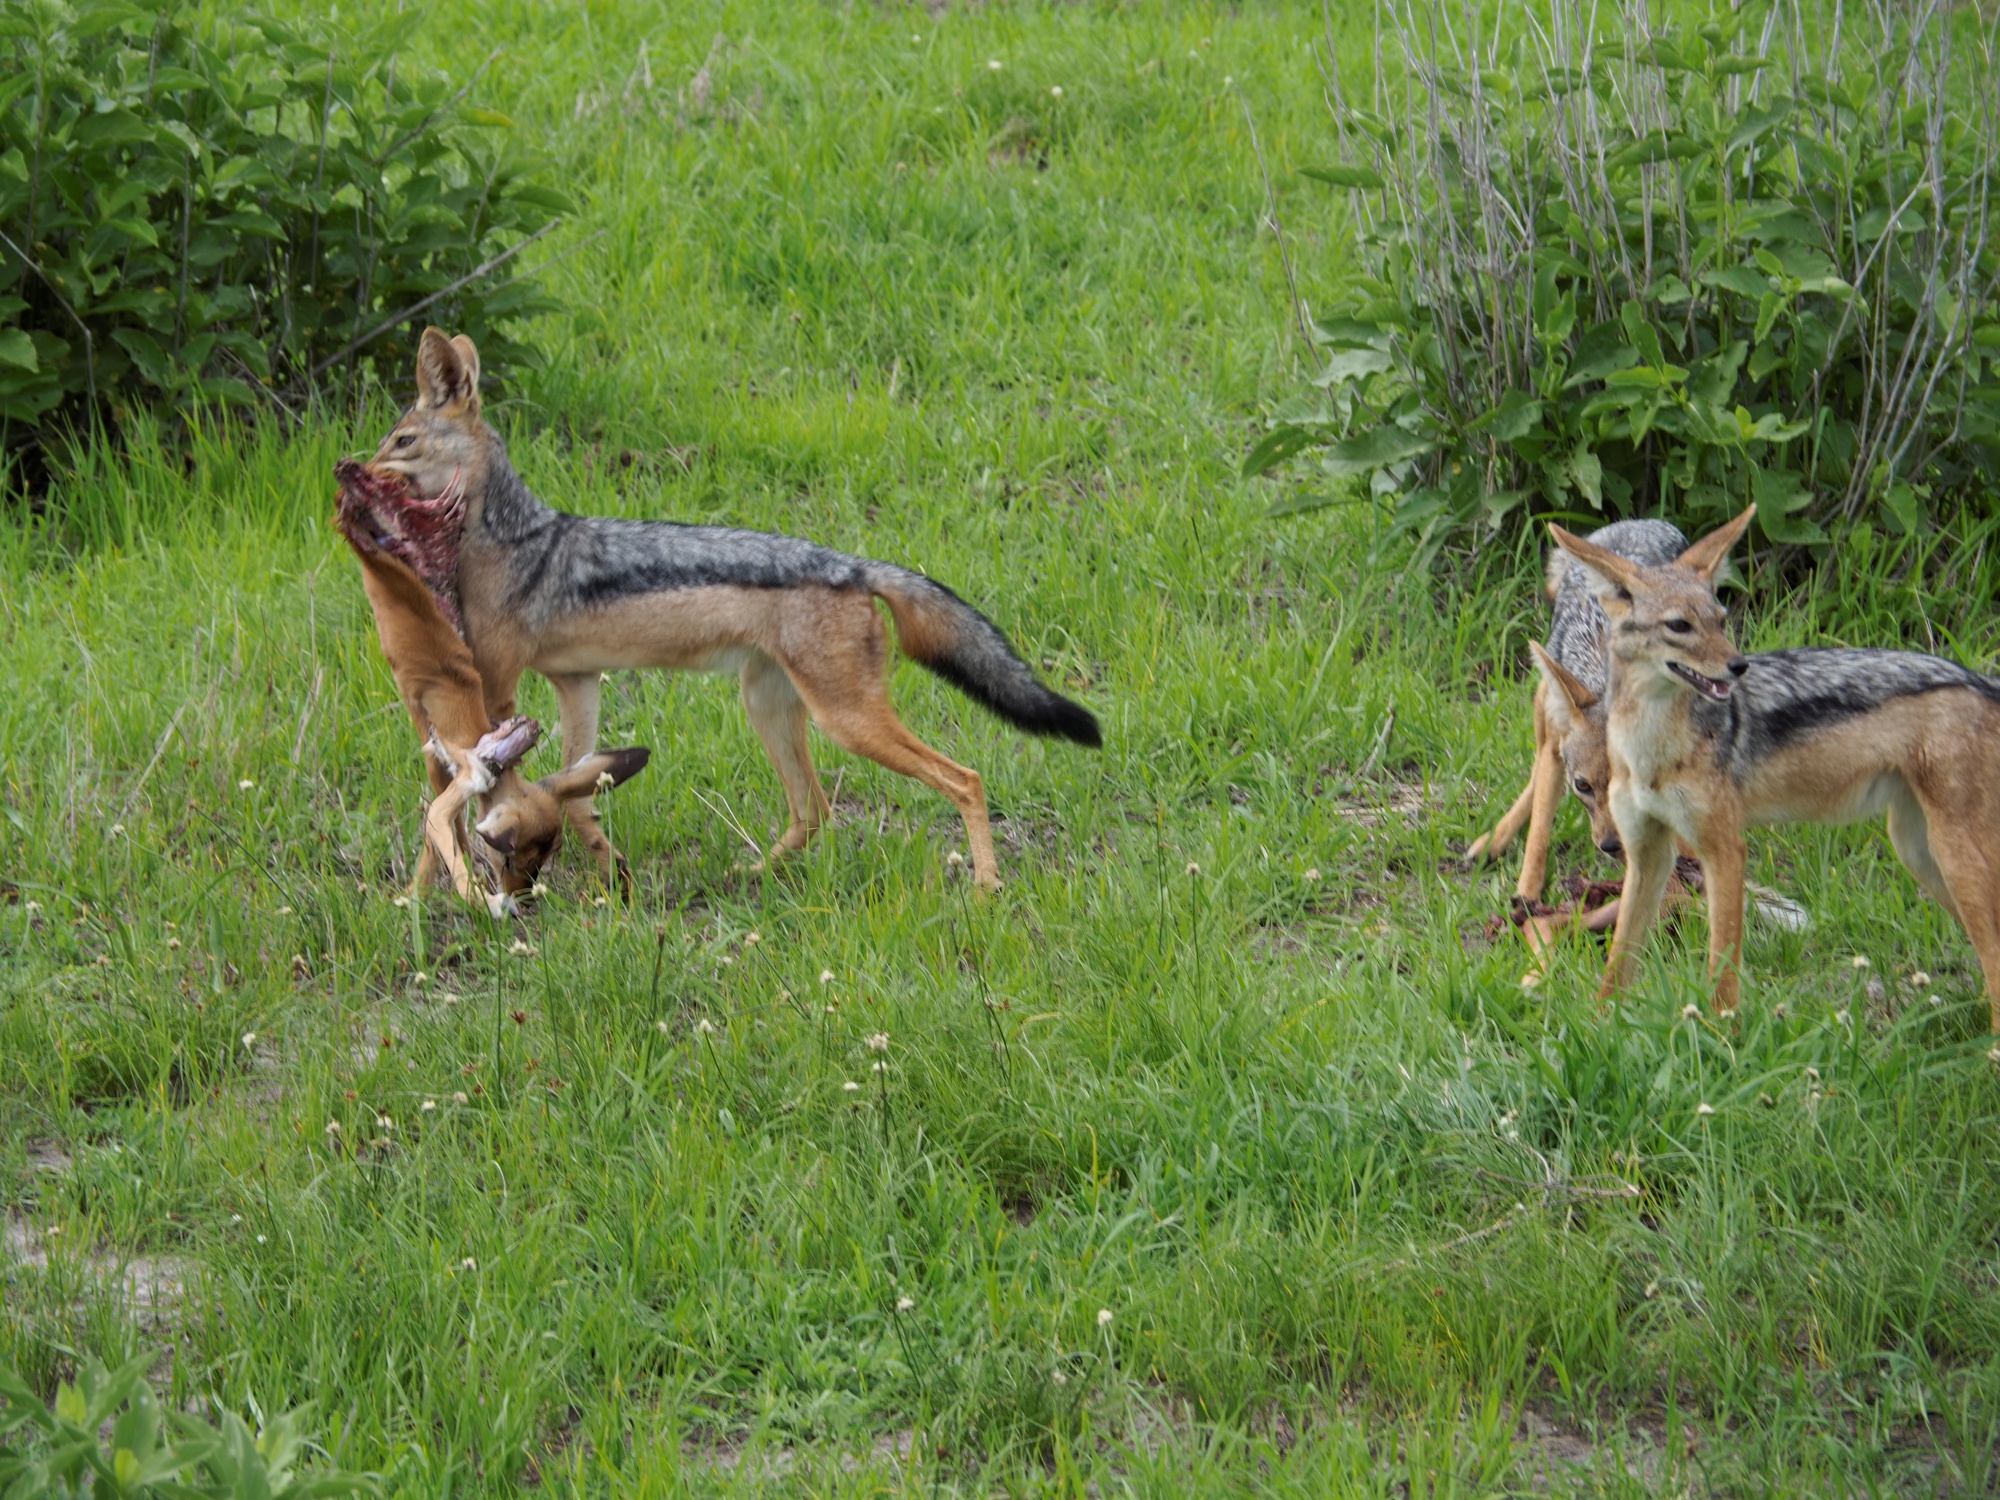 The Jackals chased off the vultures to snag this kill